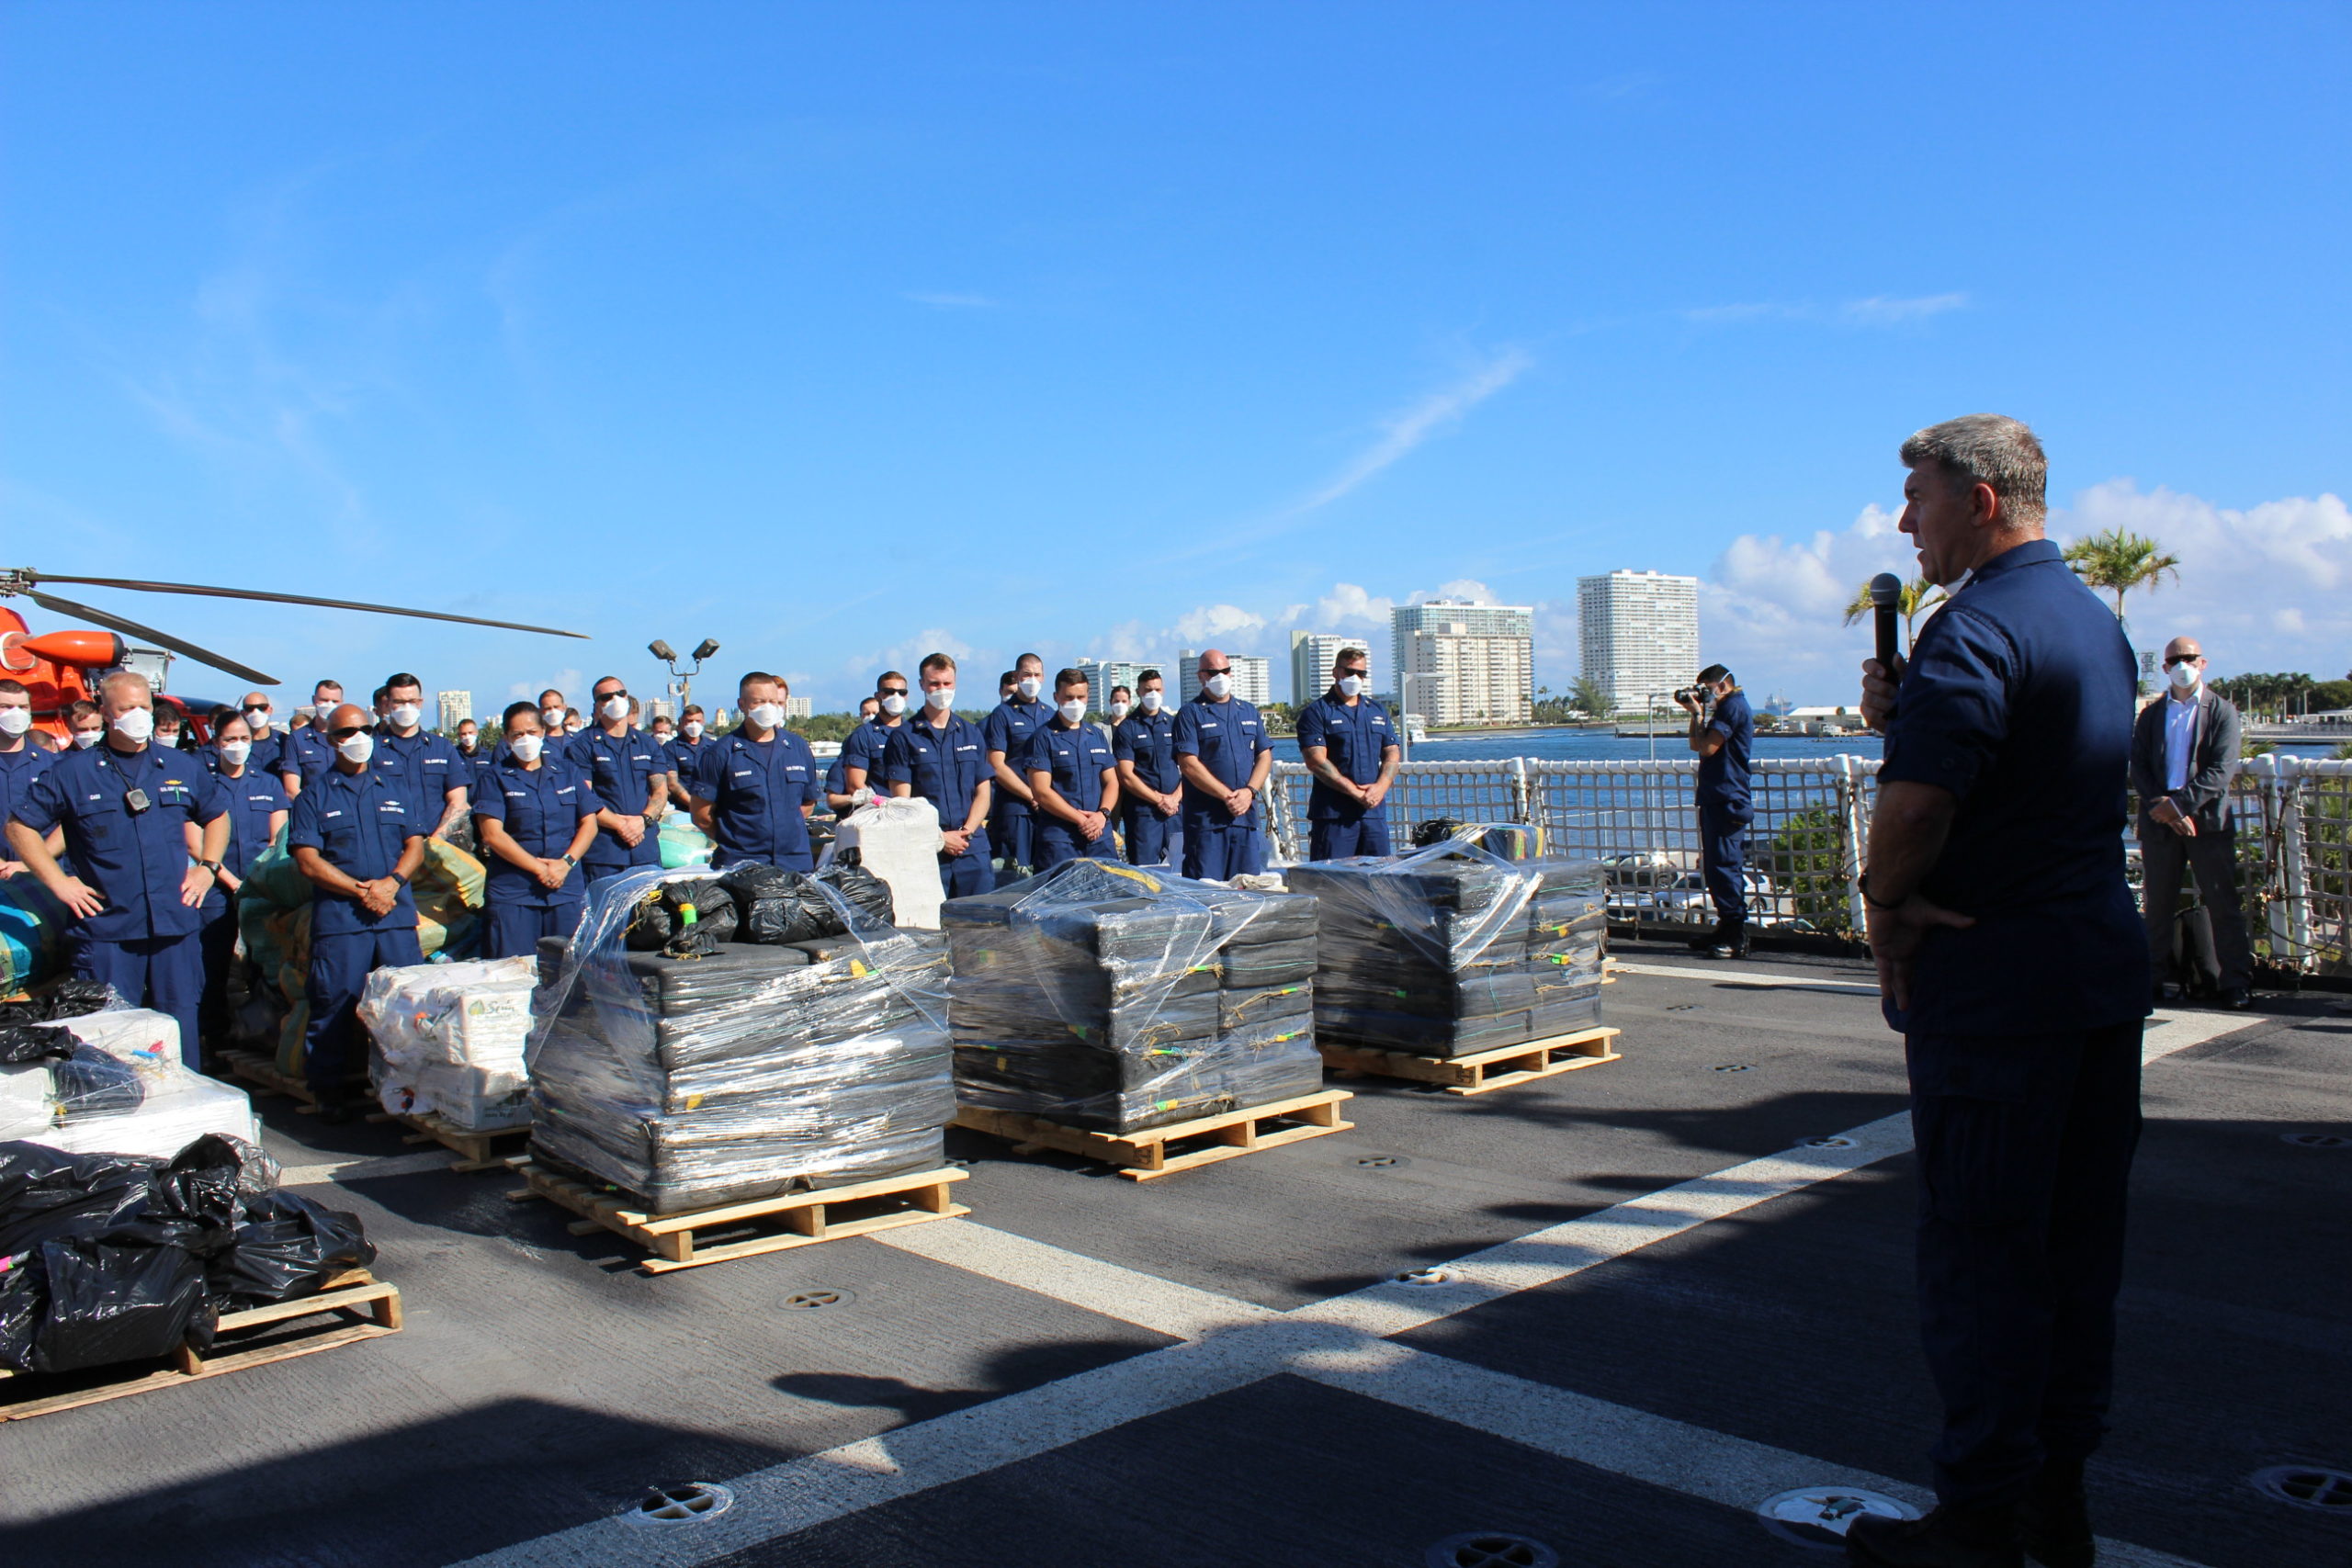 Working with International Partners, US Coast Guard Offloads More than $411 Million Worth of Drugs 